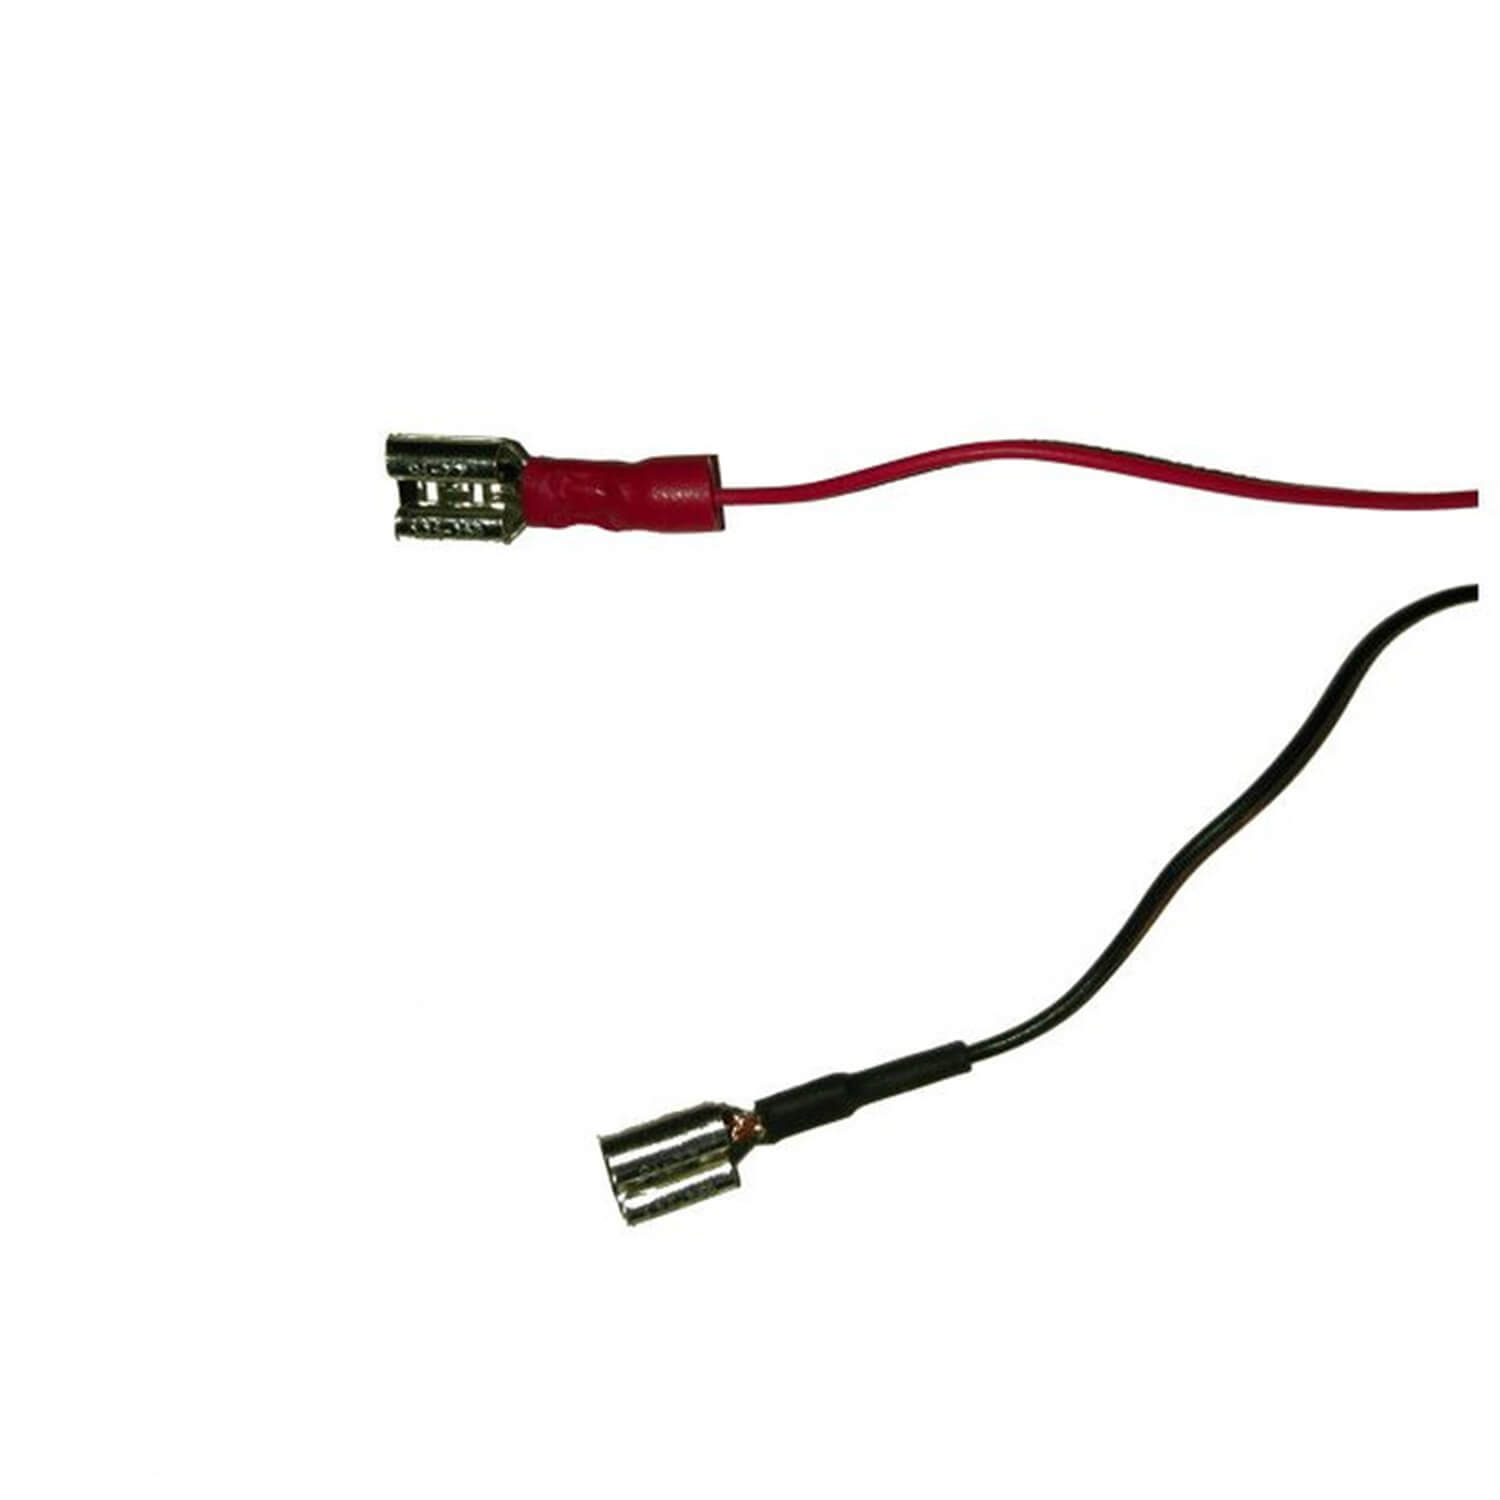 ICU Cable 12V - 2 meter